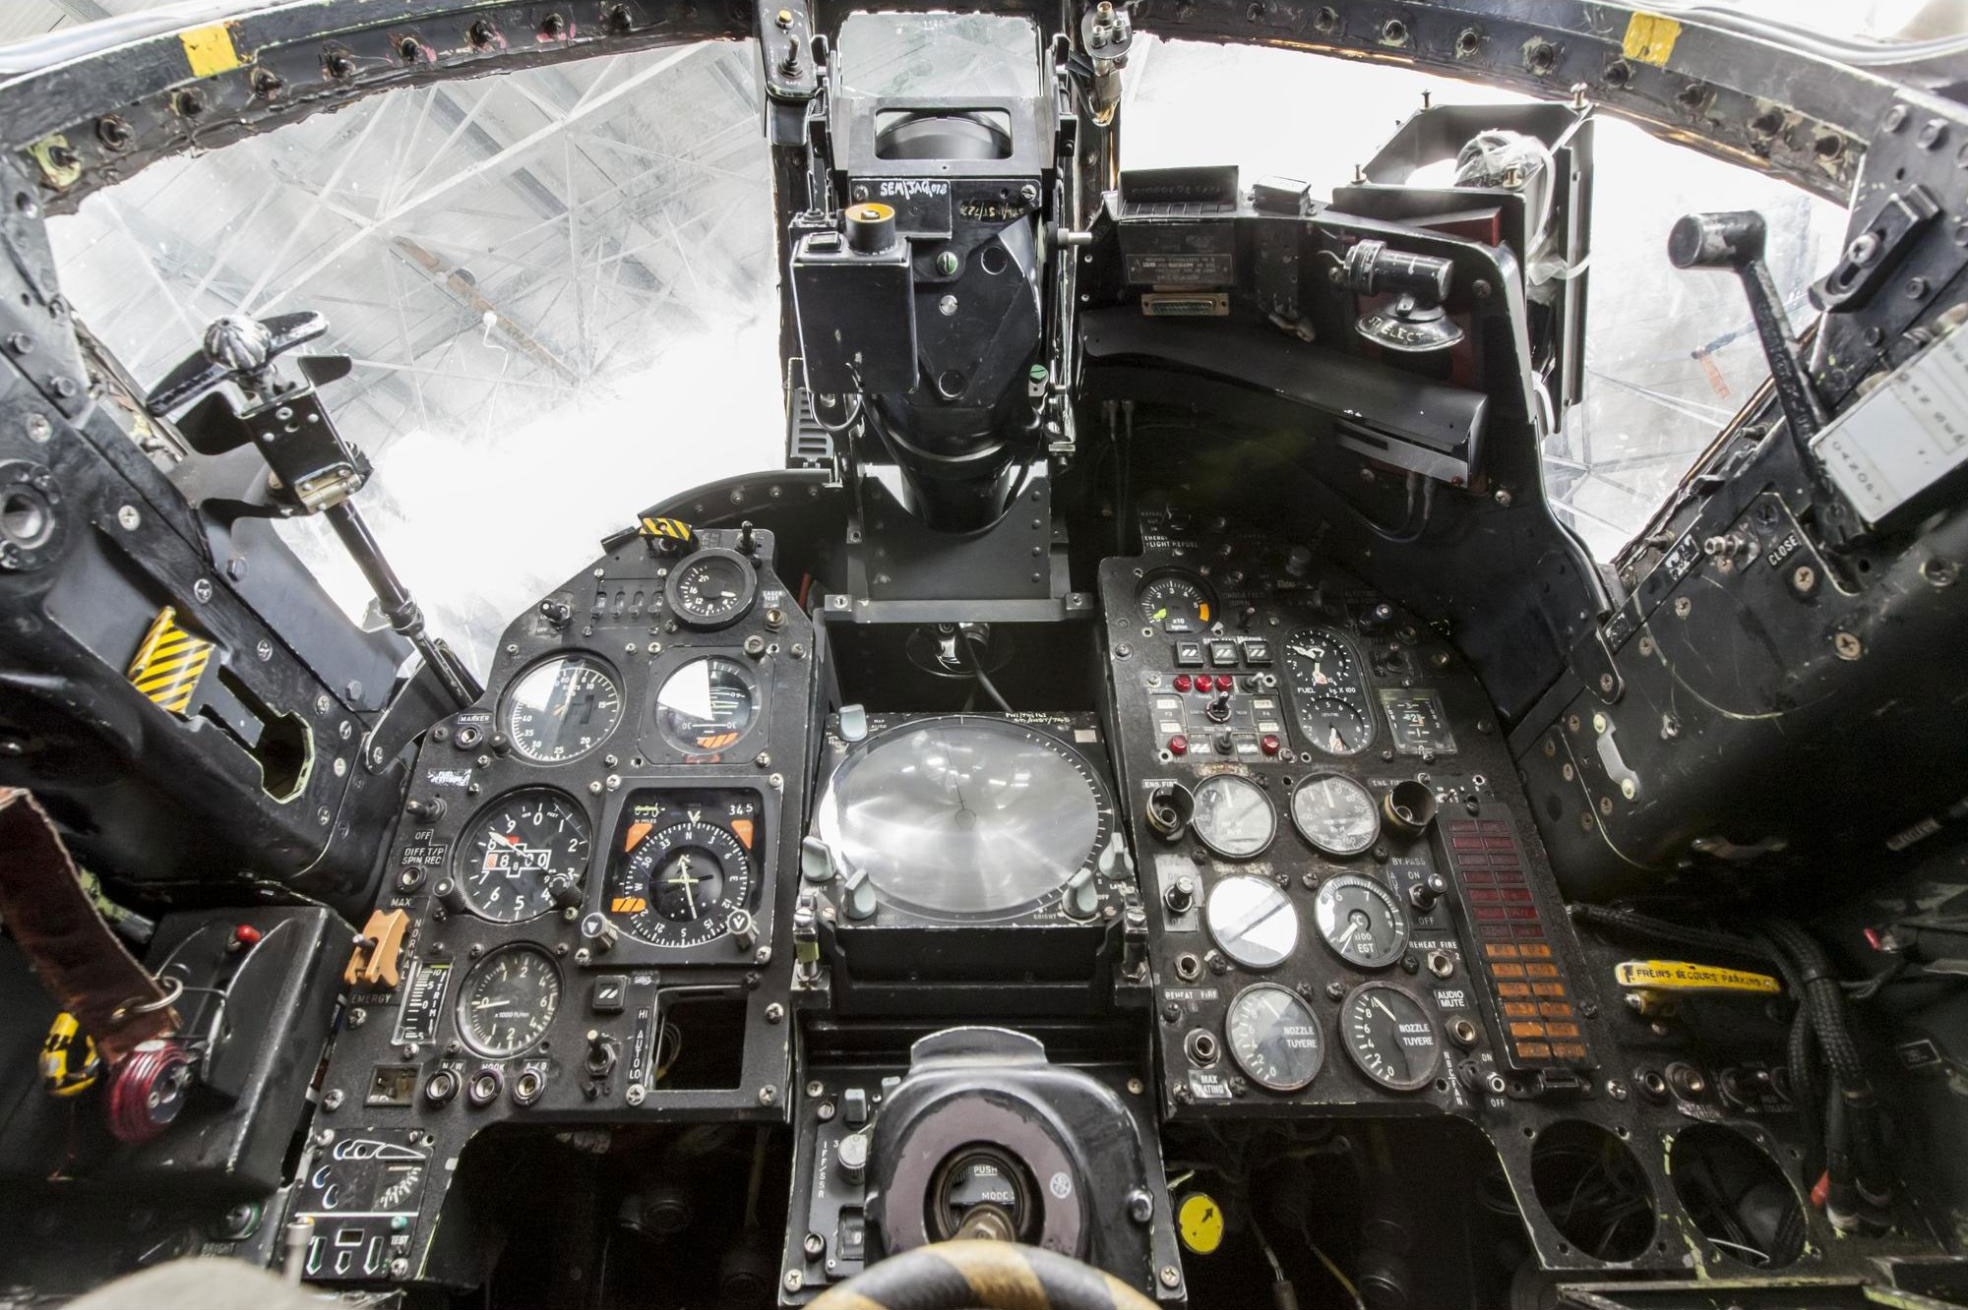 Inside the cockpit of a Jaguar aircraft. There are several dials and switches on the dashboard.